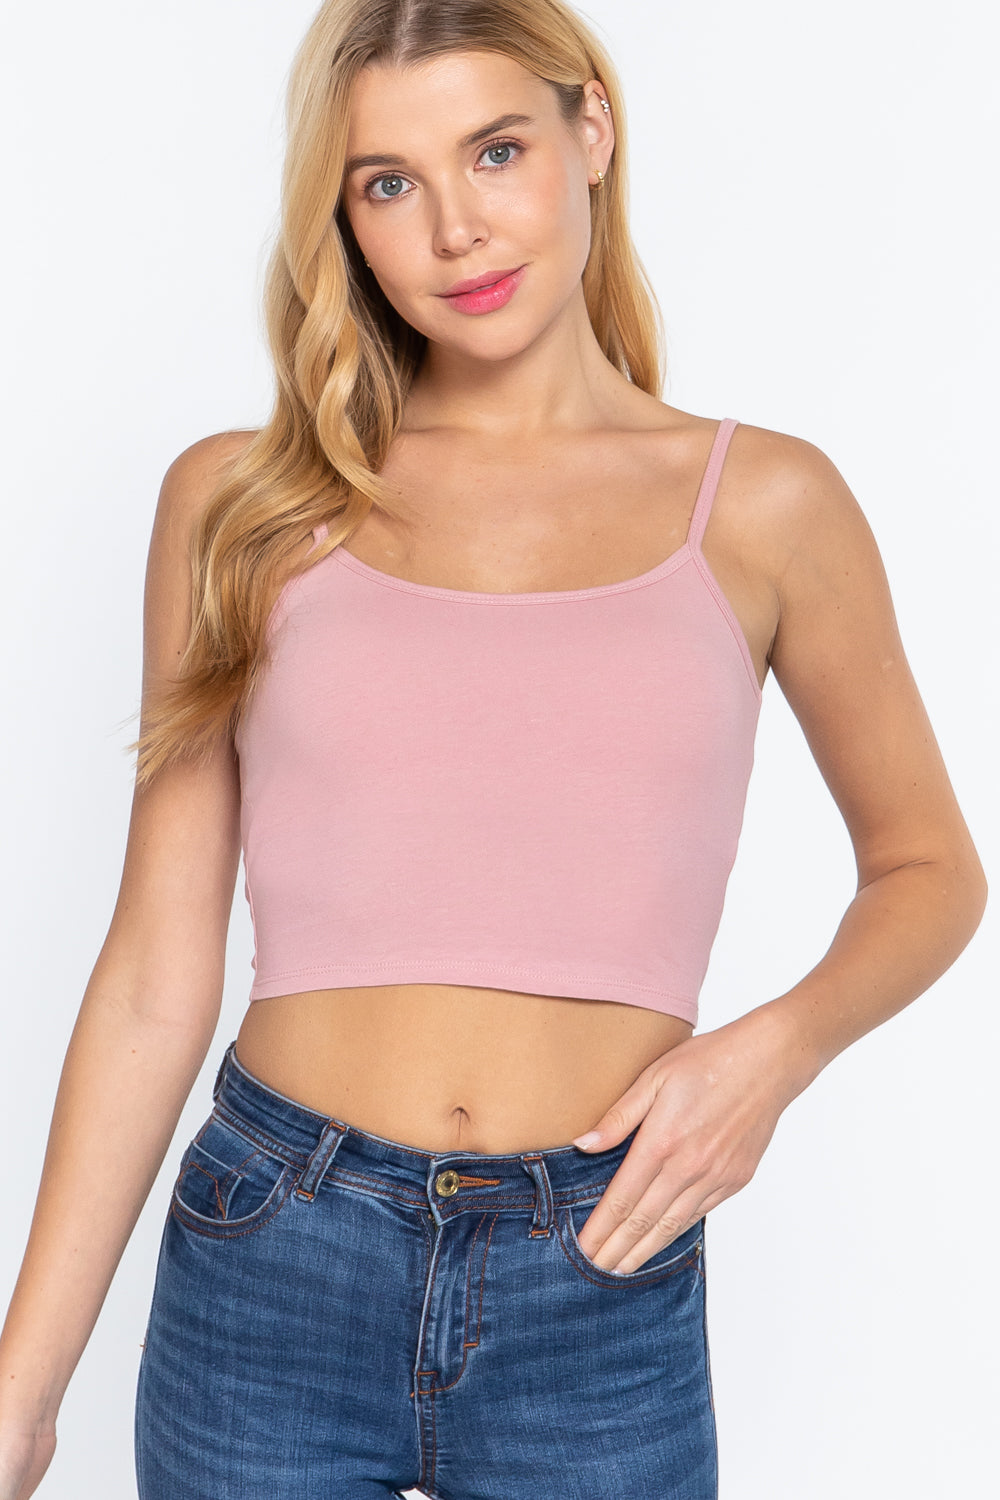 Round Neck with Removable Bra Cup Cotton Spandex Bra Top in Paint Pink